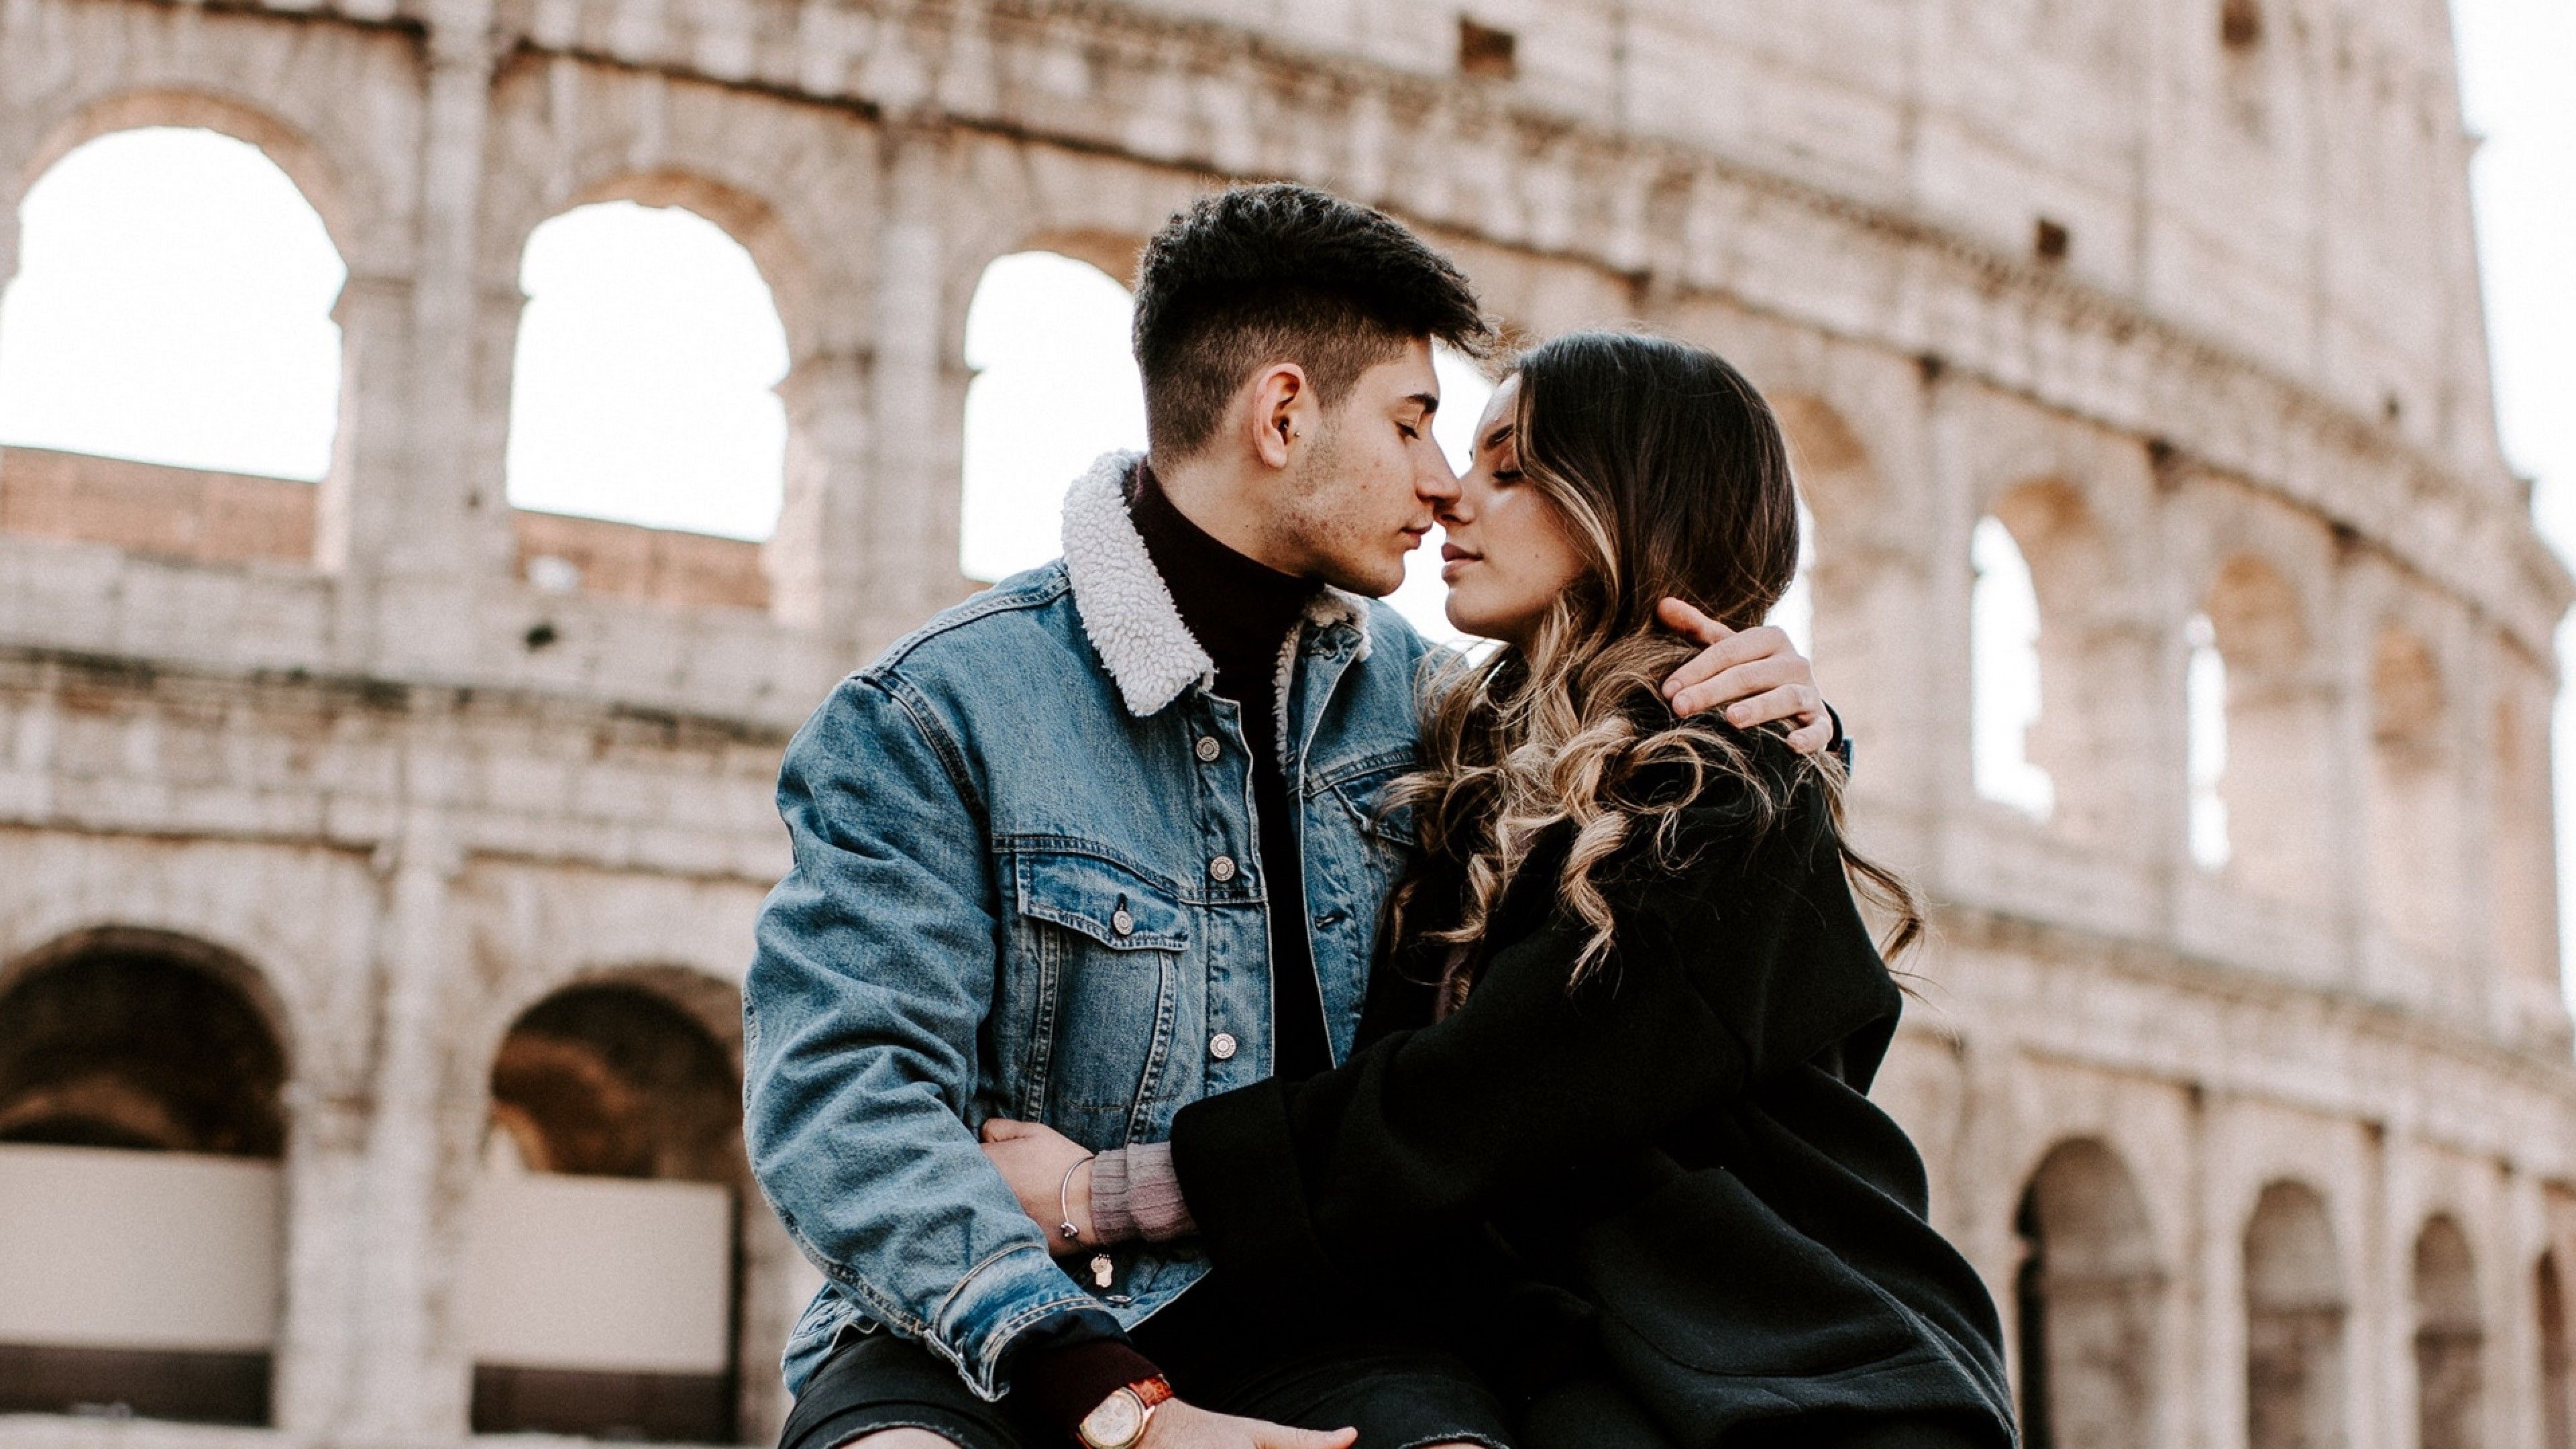 Couple kissing at the Coloseum HD Wallpaper 4K Ultra HD